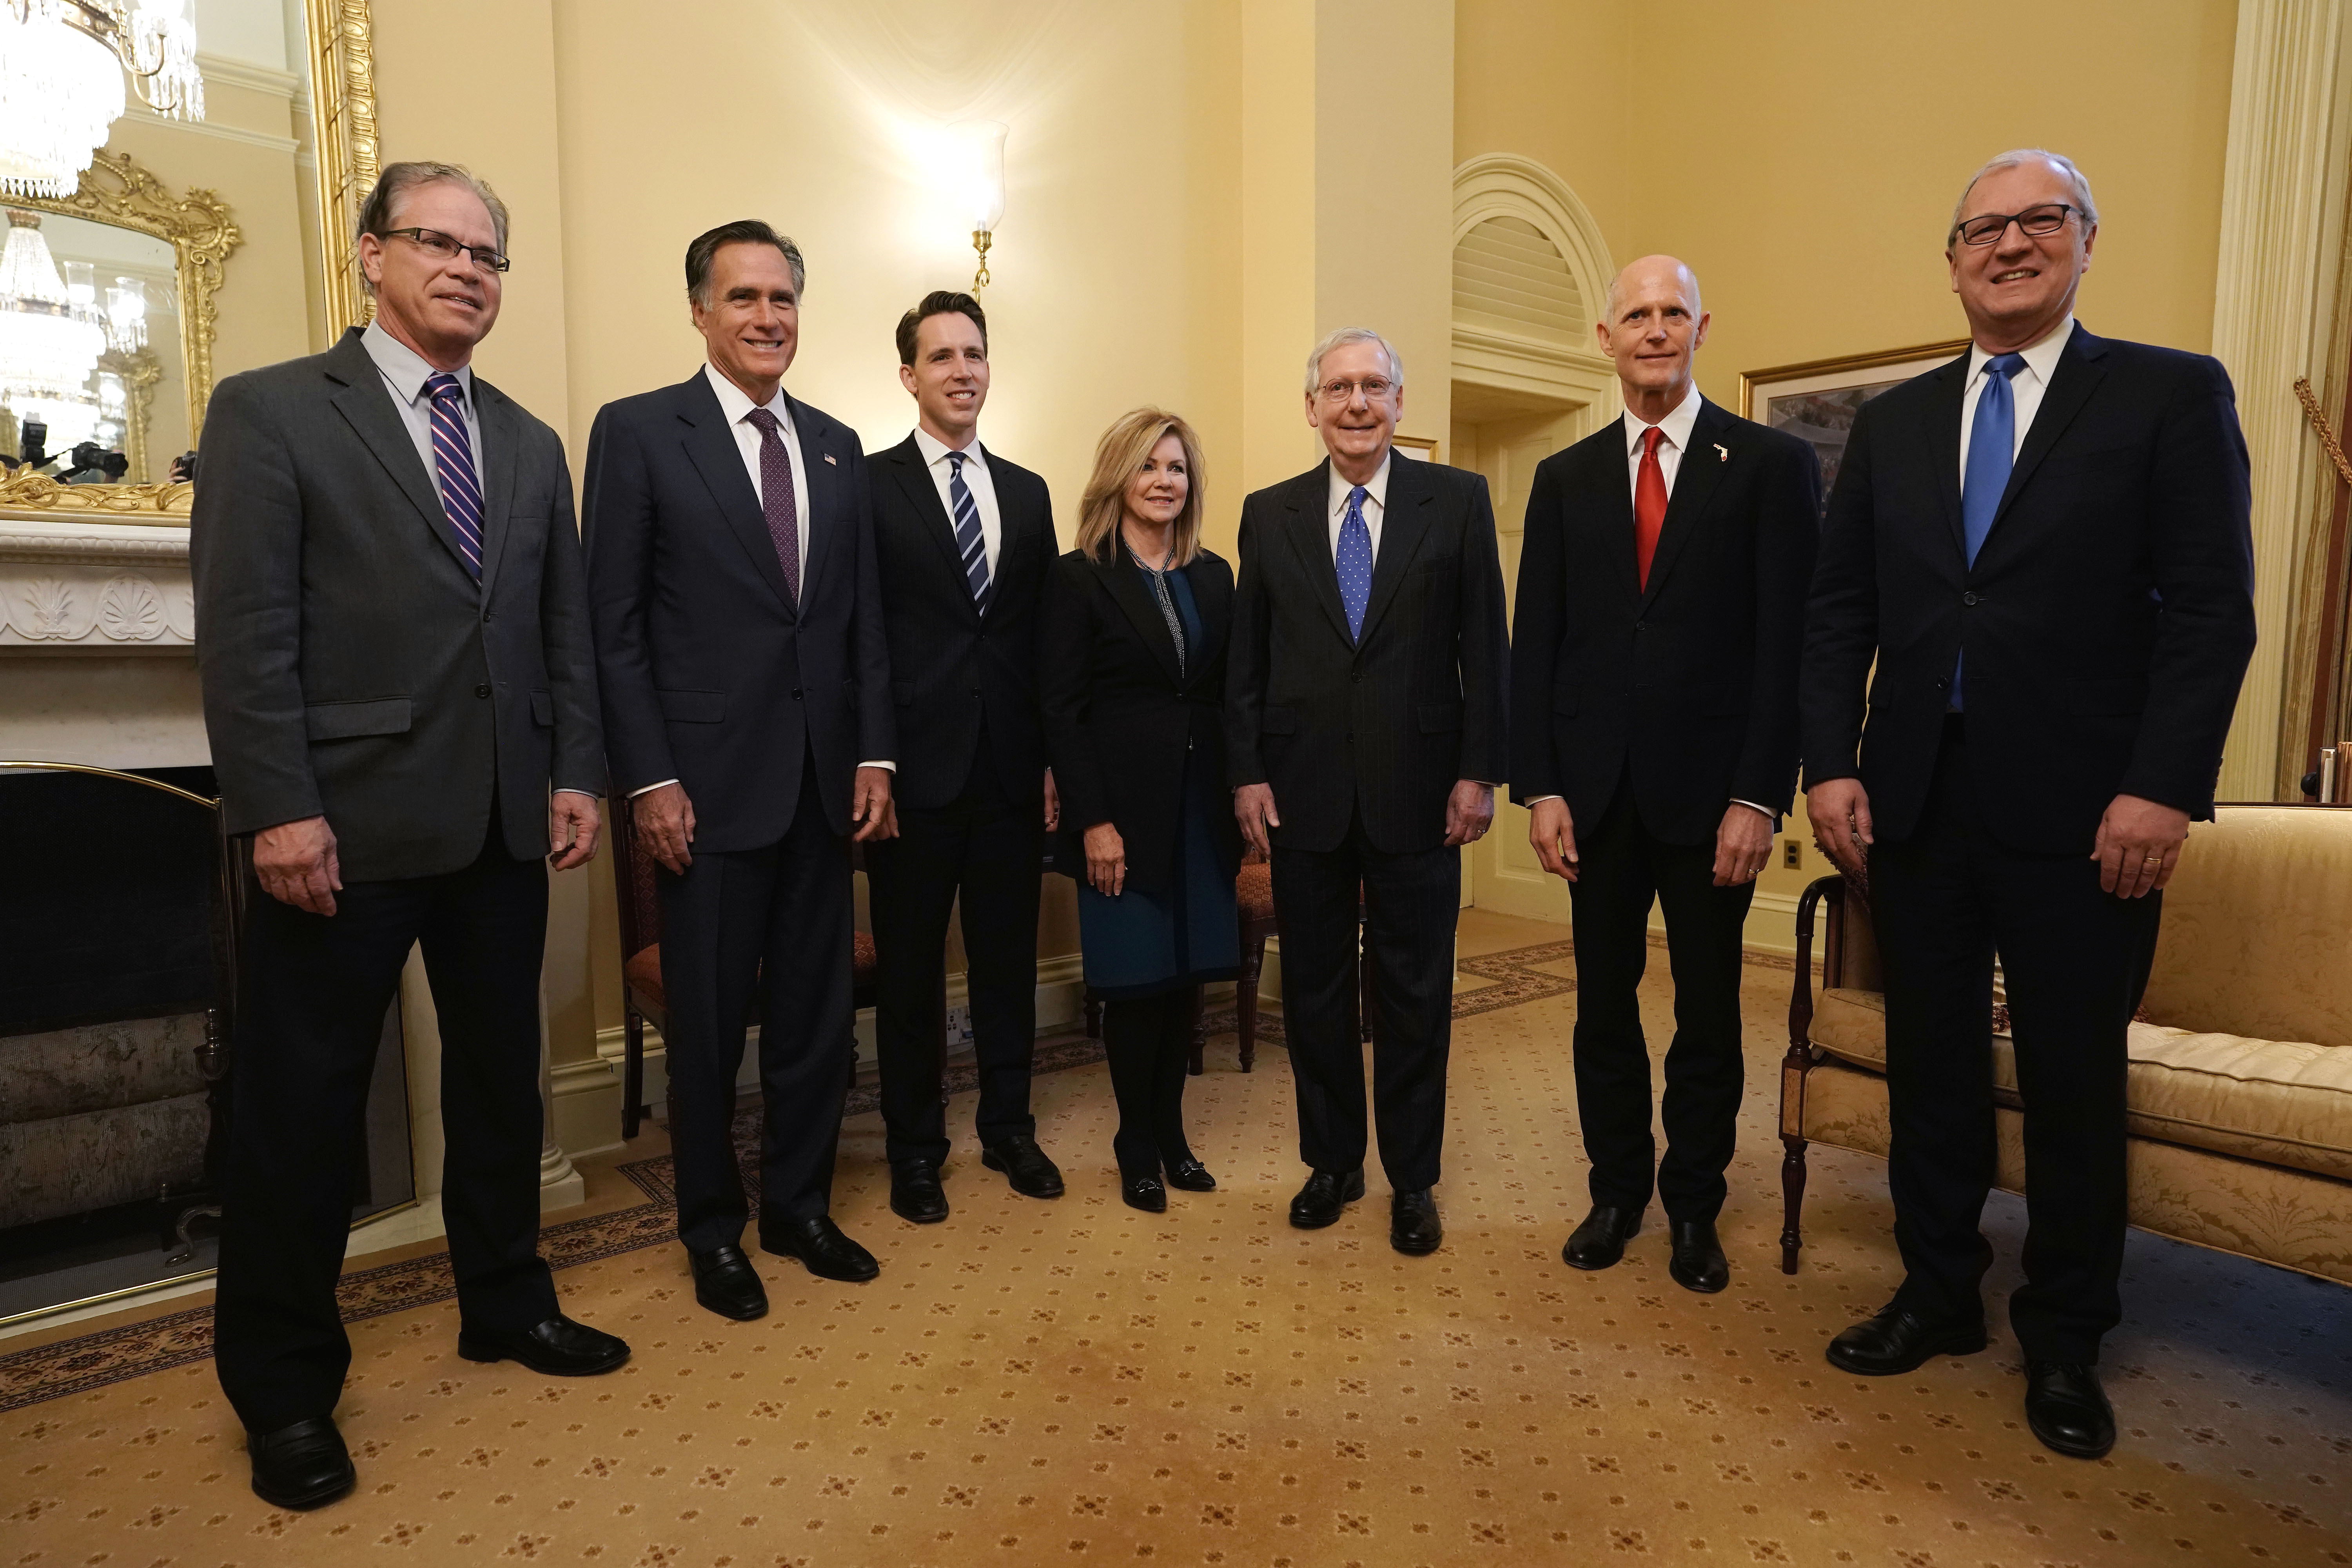 U.S. Senate Majority Leader Sen. Mitch McConnell (R-KY) (5th L) poses for photos with Republican Senator-elects Mike Braun of Indiana (L), Mitt Romney of Utah (2nd L), Josh Hawley of Missouri (3rd L), Marsha Blackburn of Tennessee (4th L), Kevin Cramer of North Dakota (R) and Republican U.S. Senate candidate for Florida and incumbent Florida Gov. Rick Scott (6th L) during a photo-op at the U.S. Capitol November 14, 2018 in Washington, DC. Alex Wong/Getty Images